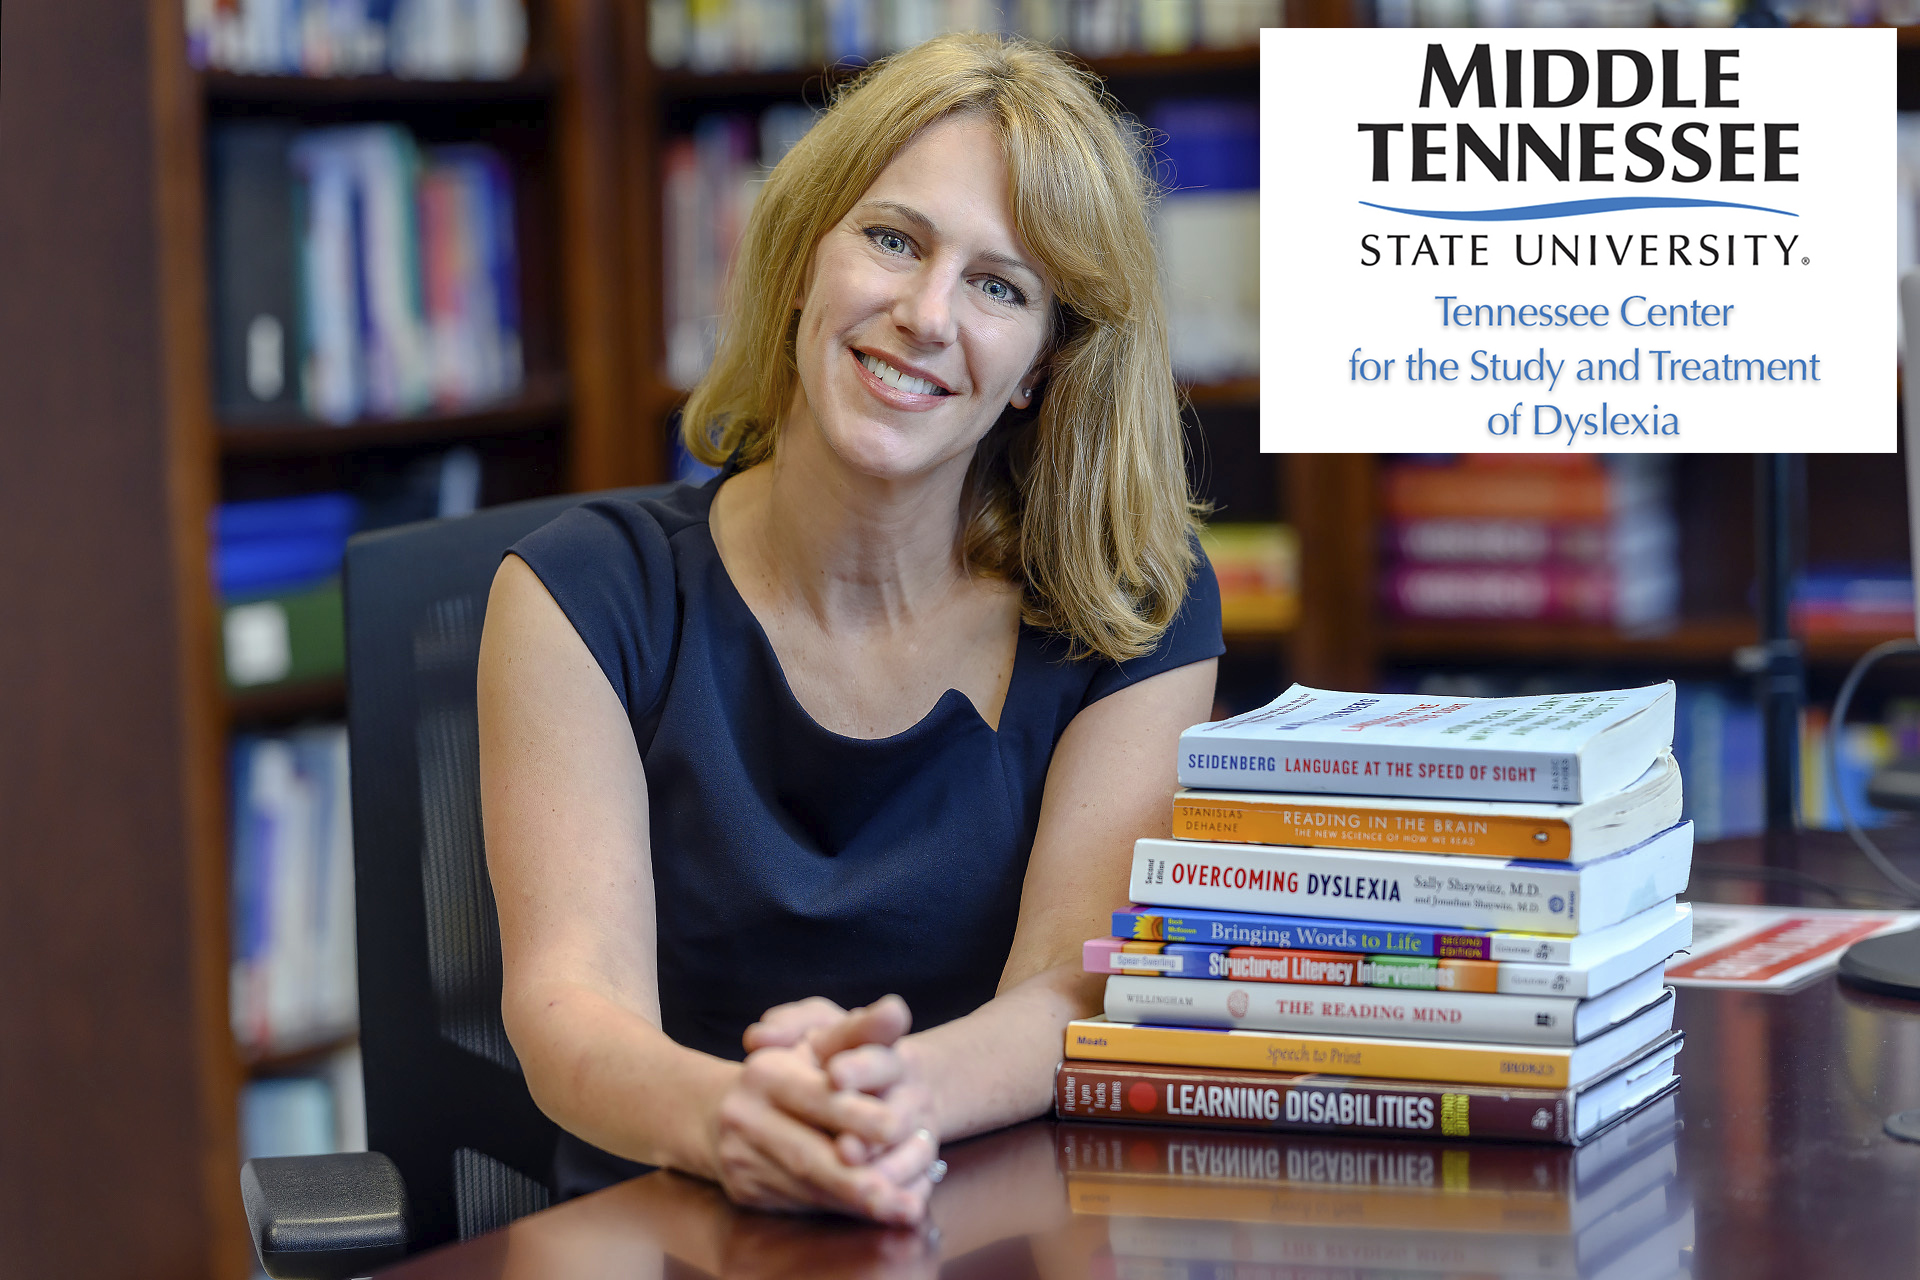 Dr. Karen Kehoe is director of Dyslexia Services at the Tennessee Center for the Study and Treatment of Dyslexia at Middle Tennessee State University.